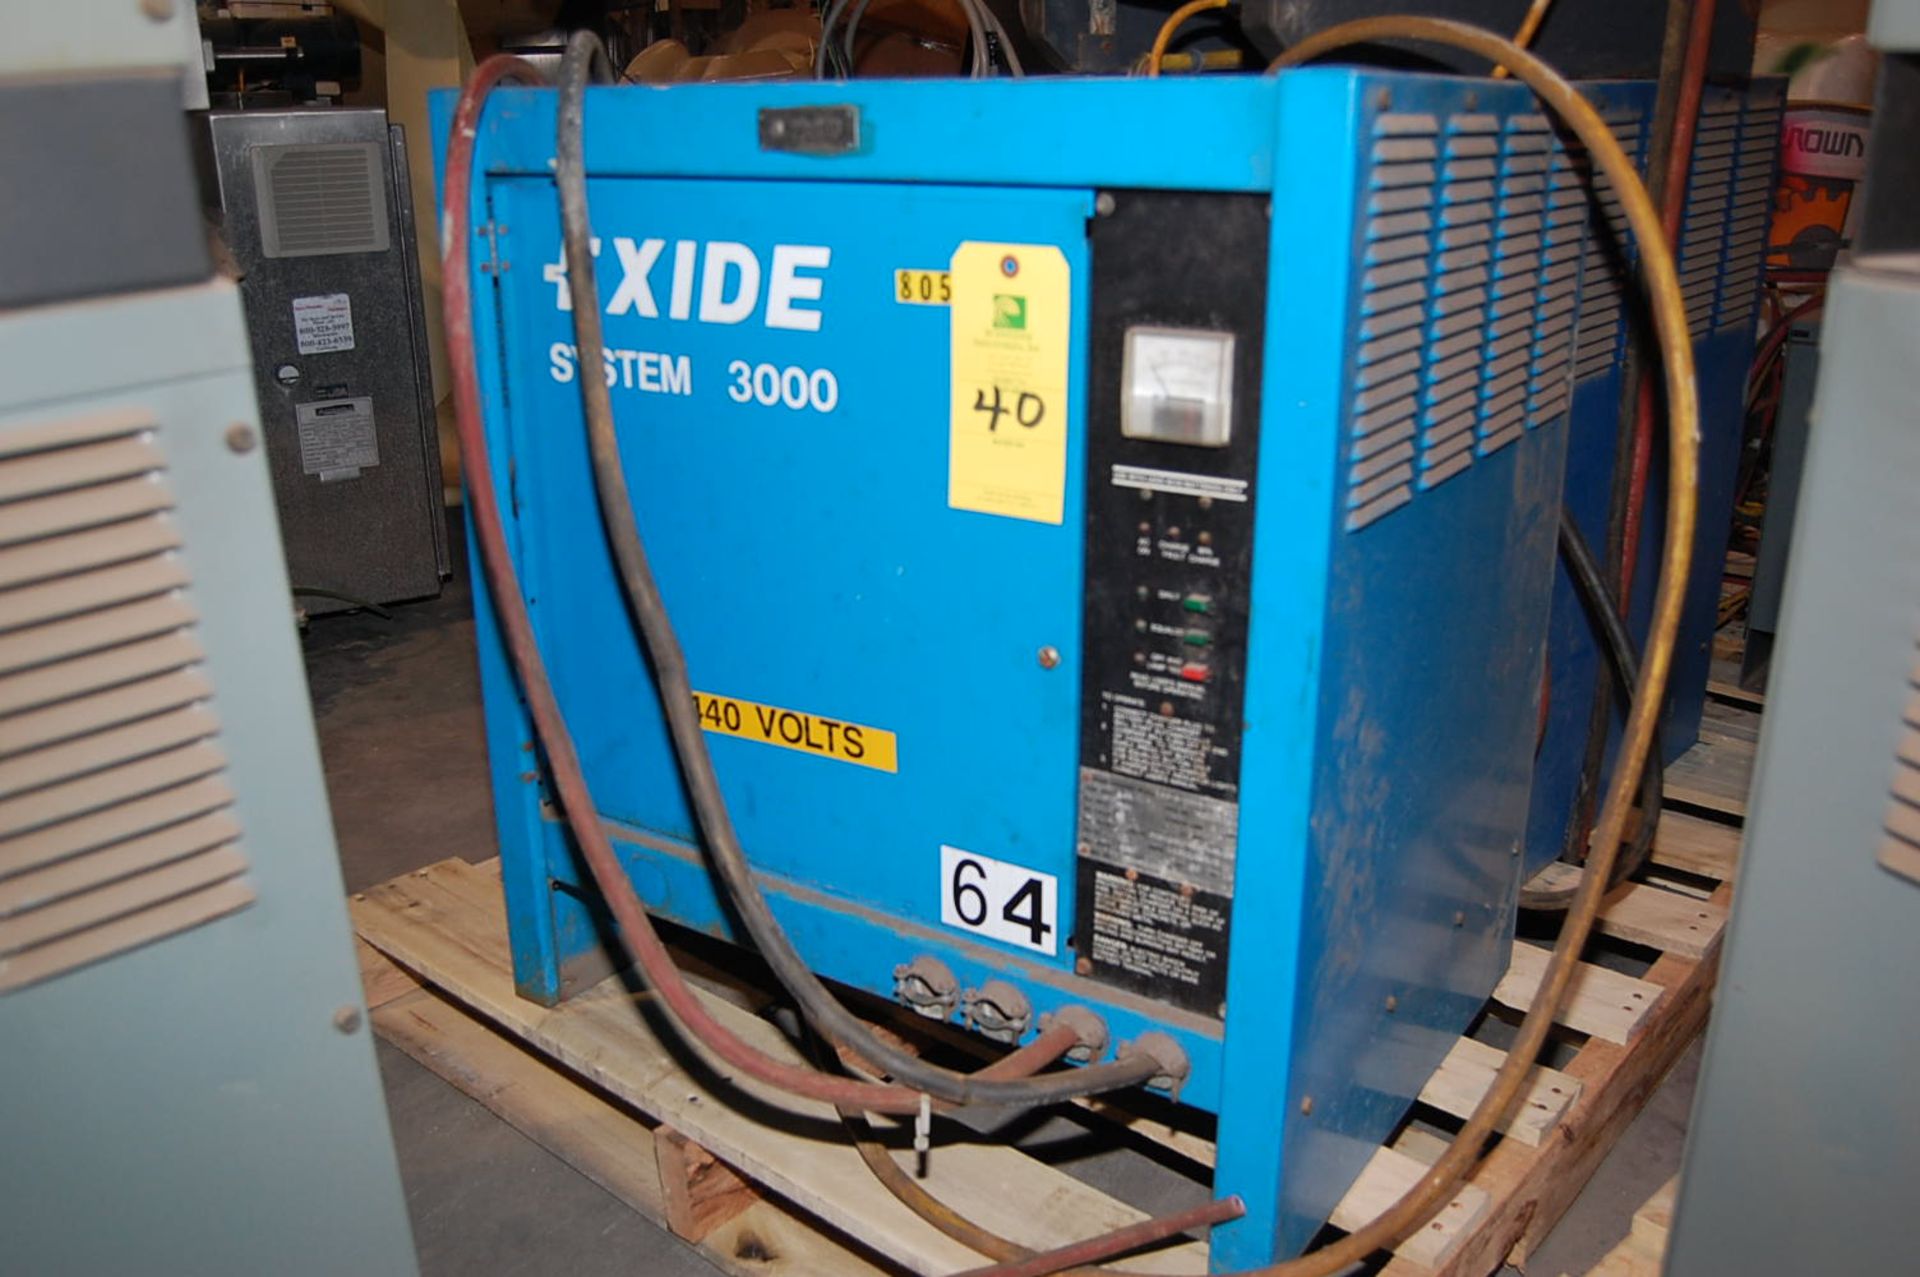 Exide System 3000 Electric Battery Charger, Rated 6 Cell/12 Volt Rigging fee: $25